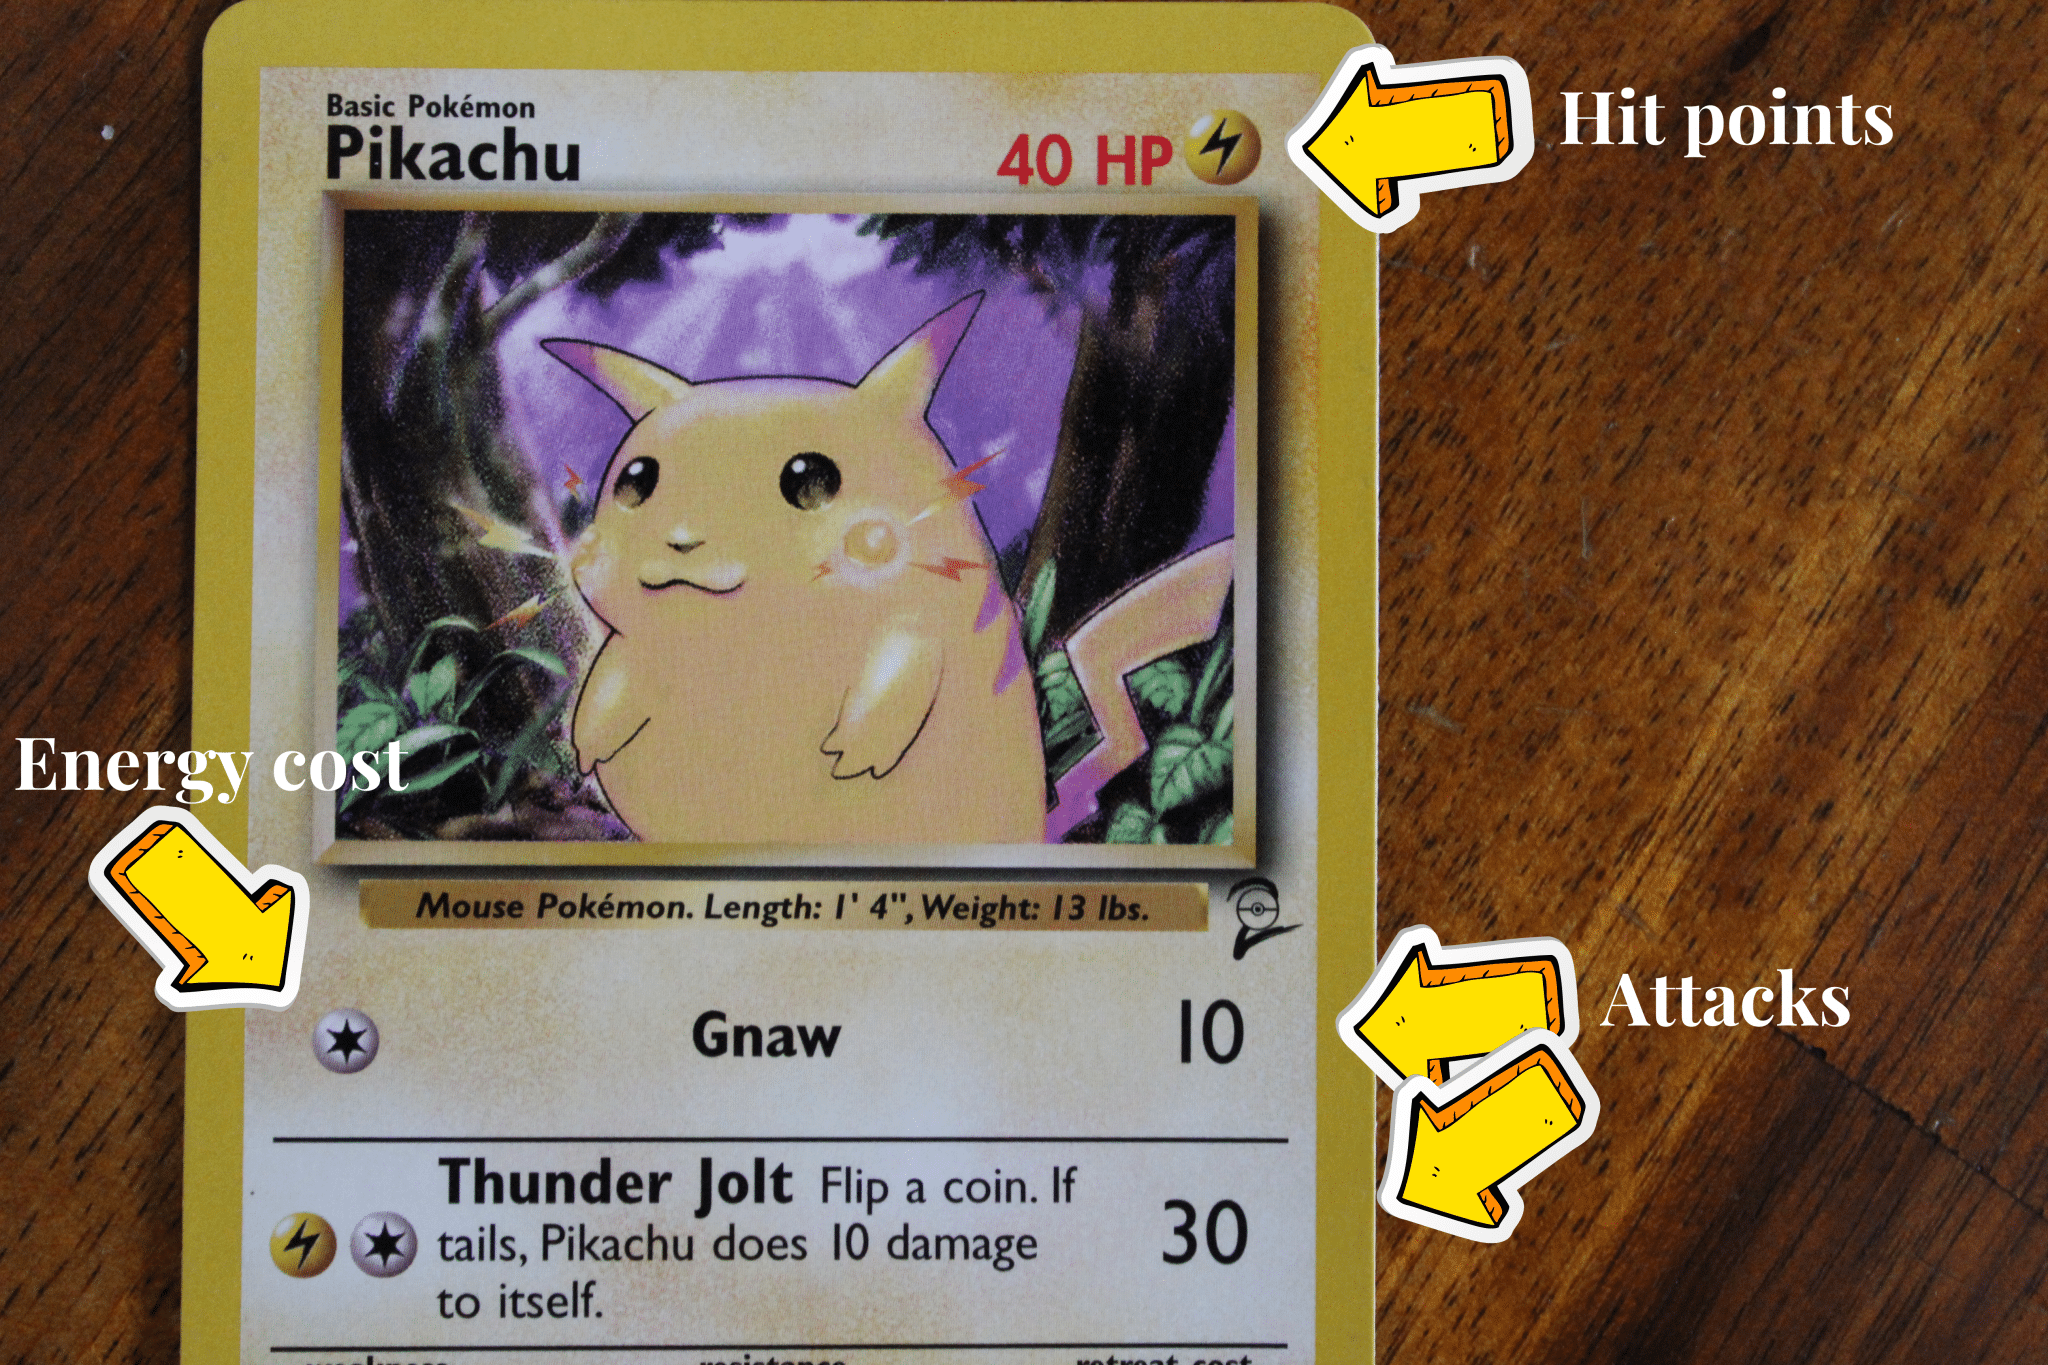 Pikachu Pokemon card, with arrows pointing to hit points, energy cost, and attacks